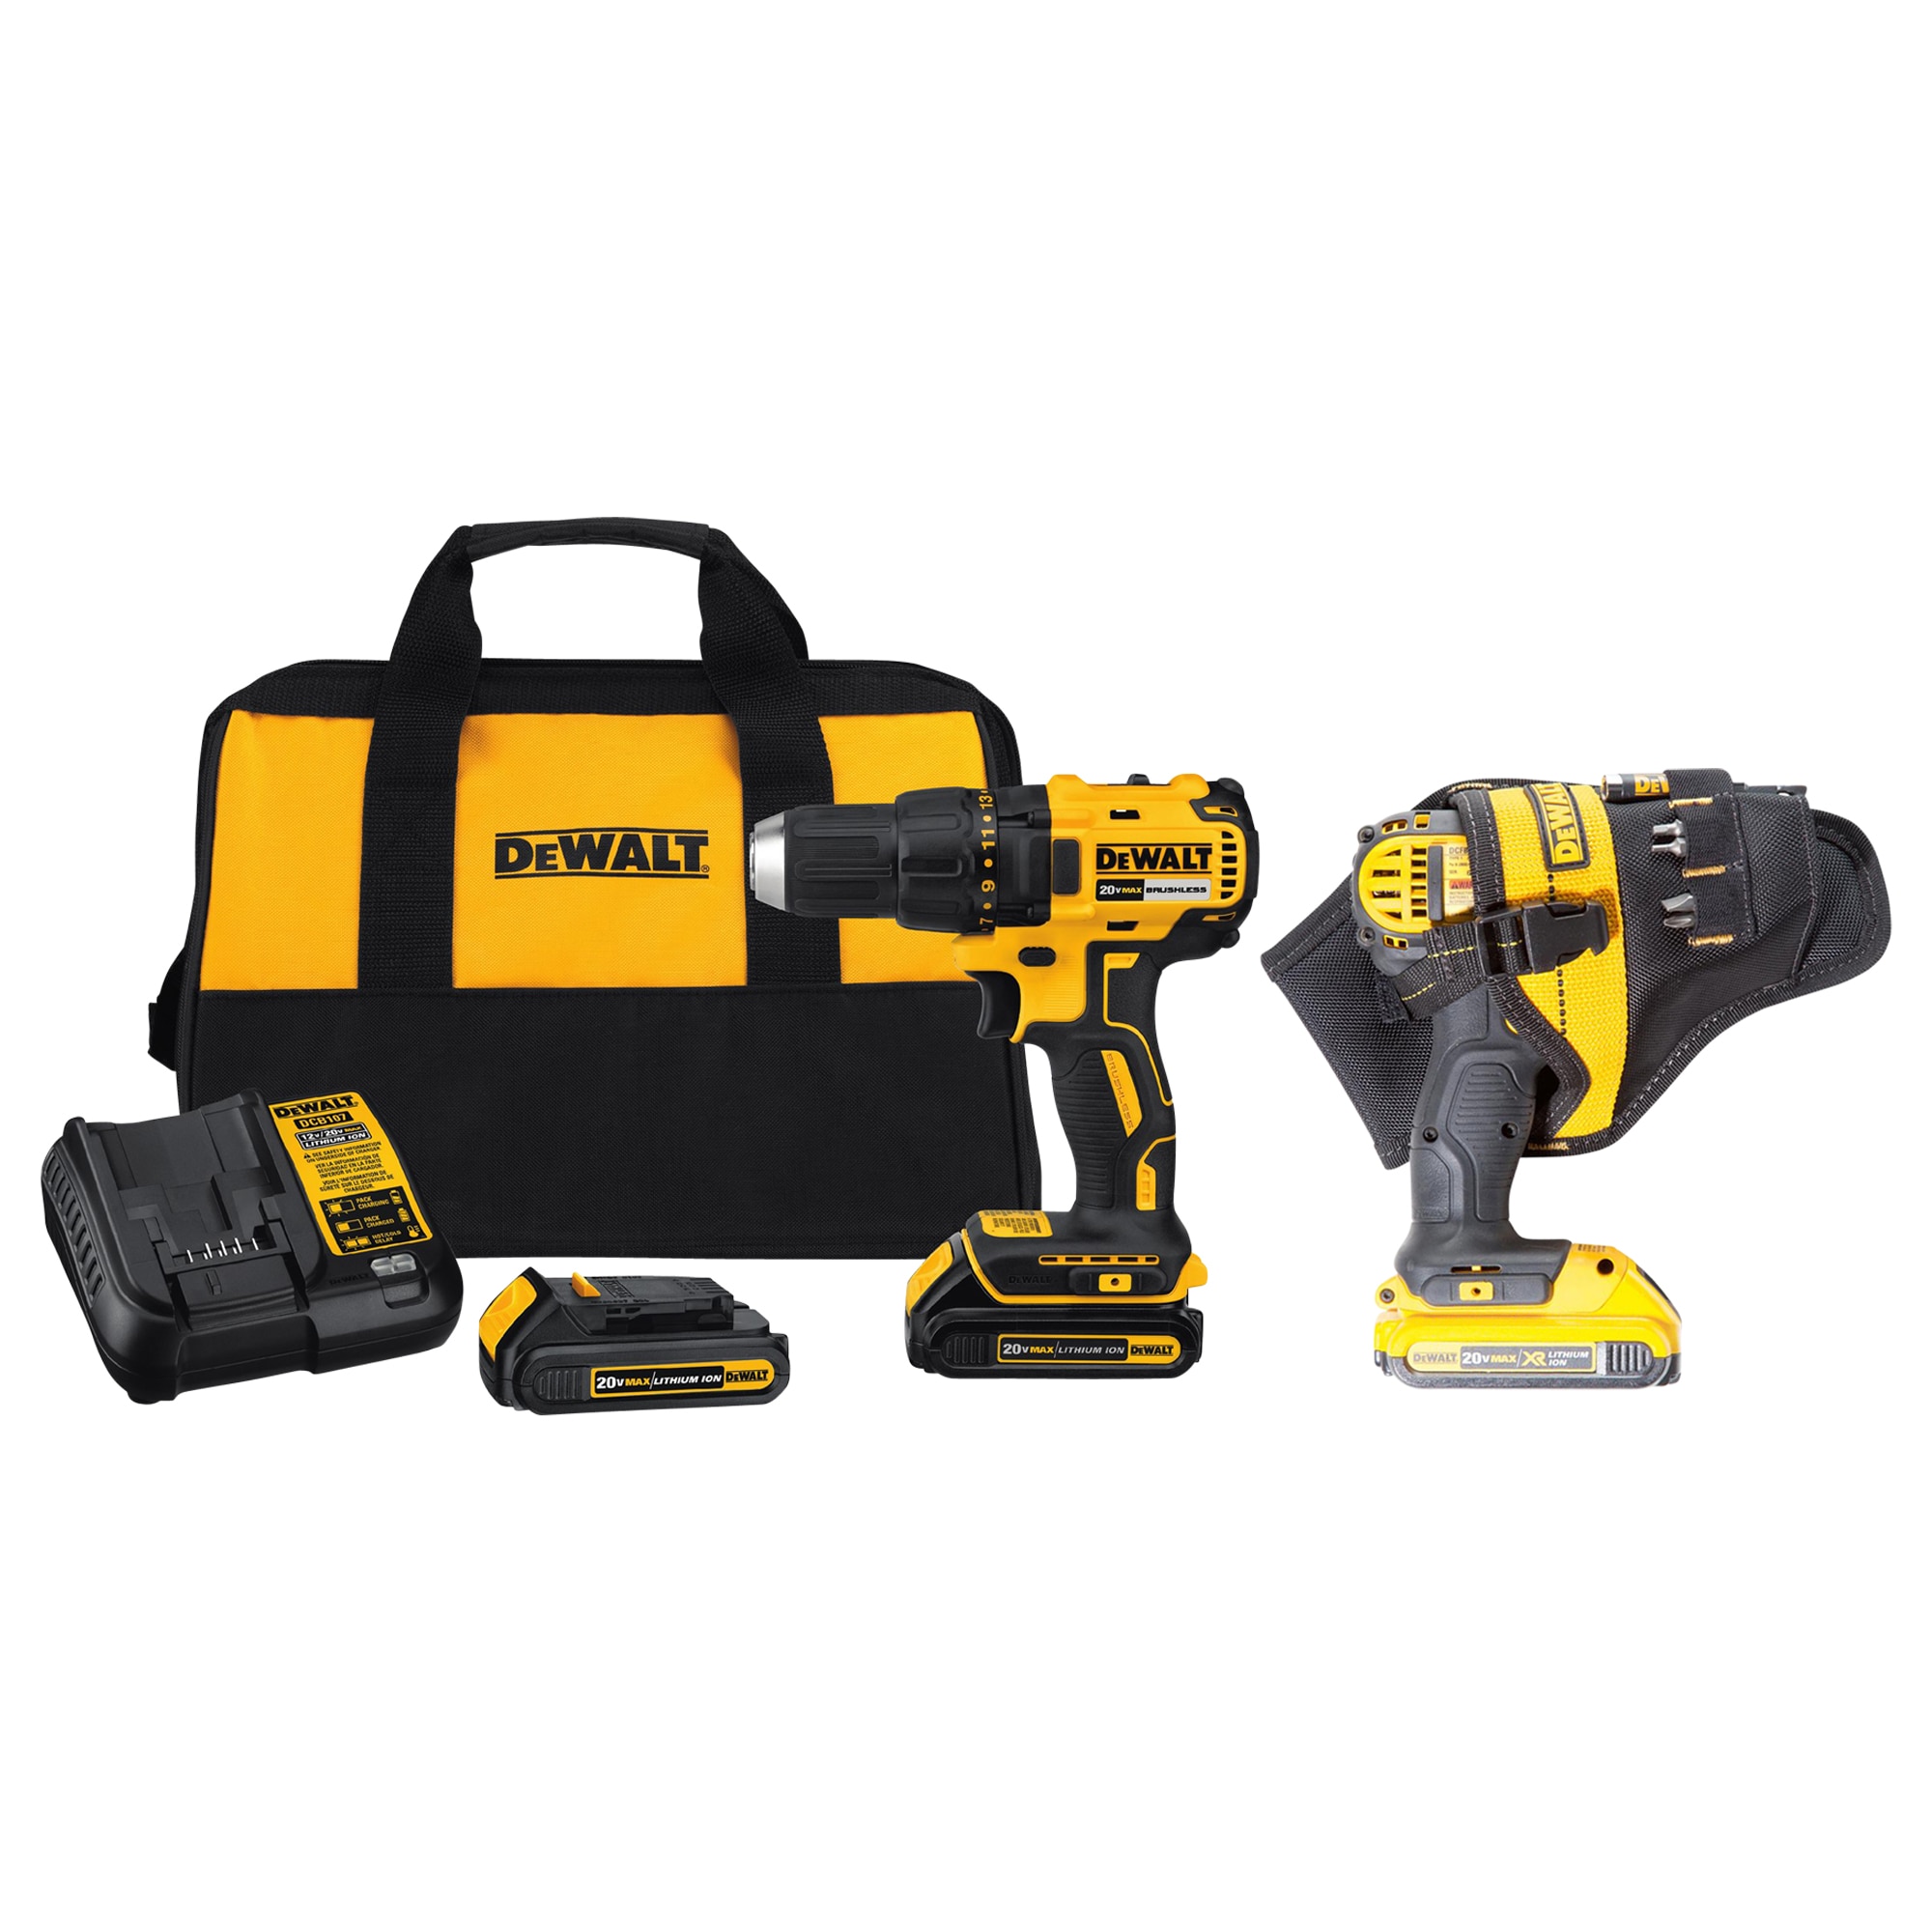 20-Volt Max Drill/Driver & Impact Driver Combo Kit, 1/2 In., (2